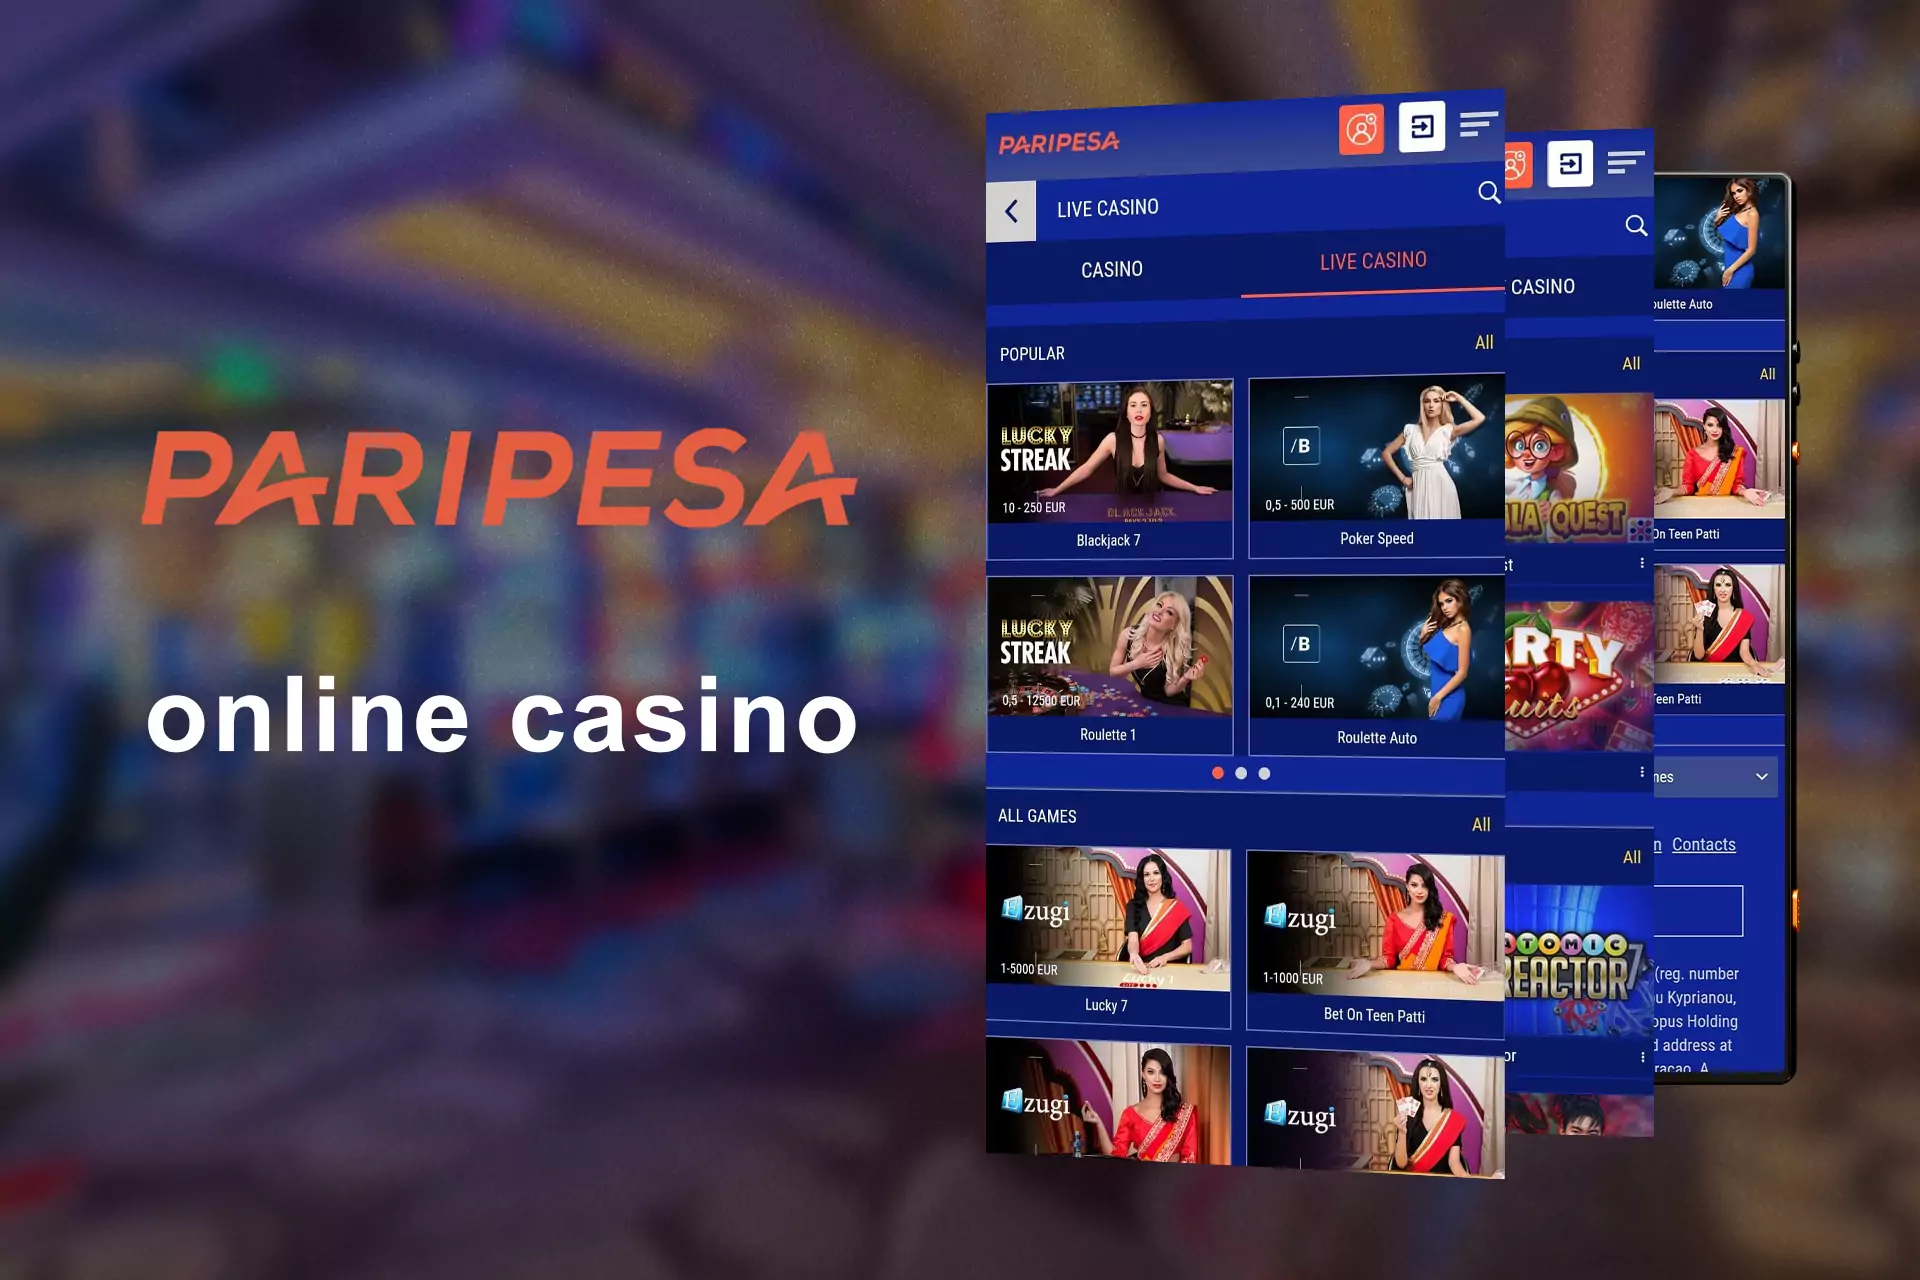 In the section of the casino, you can play slots and table games with live dealers.